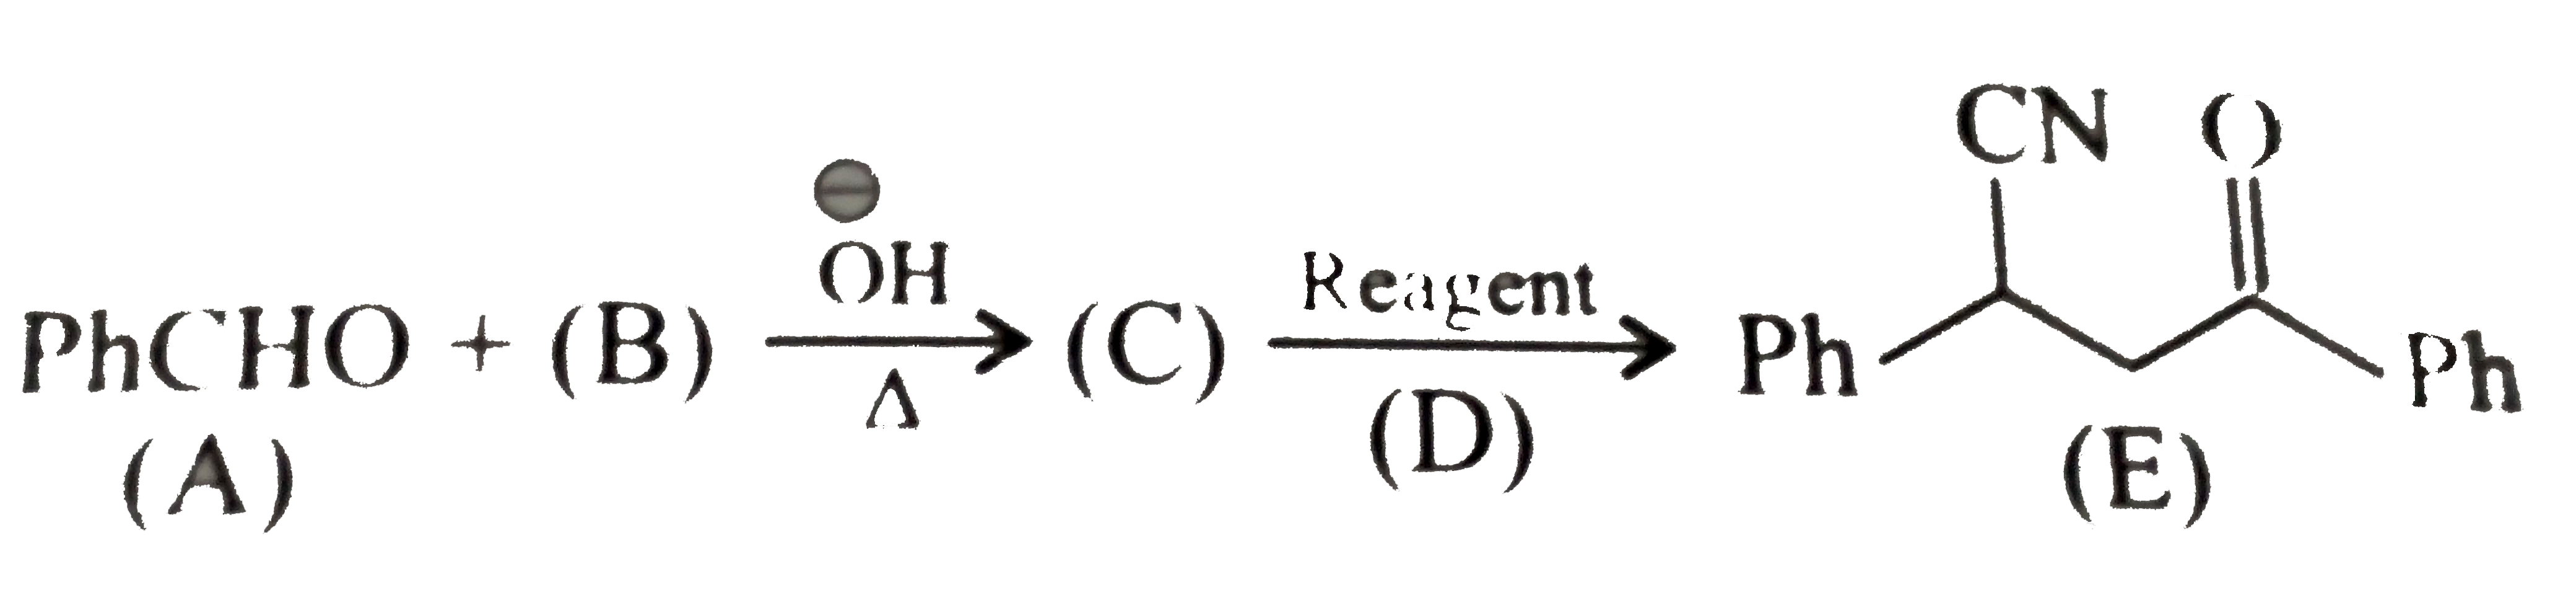 Reagent (D) is: